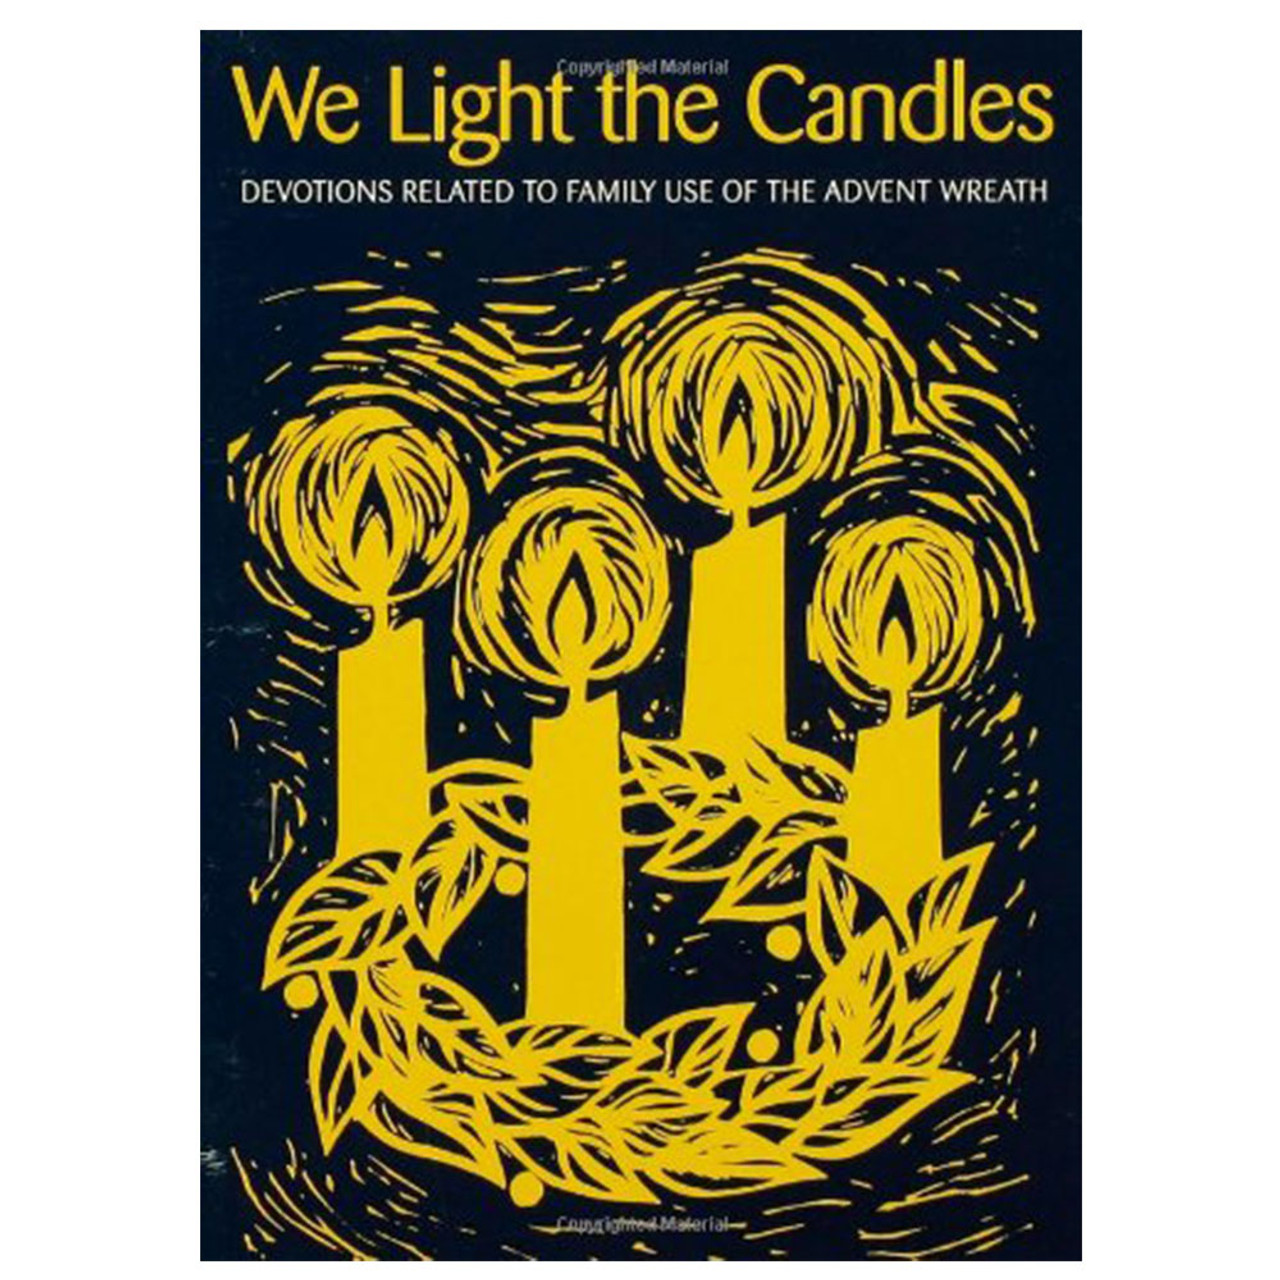 We Light the Candles by Catharine Brandt